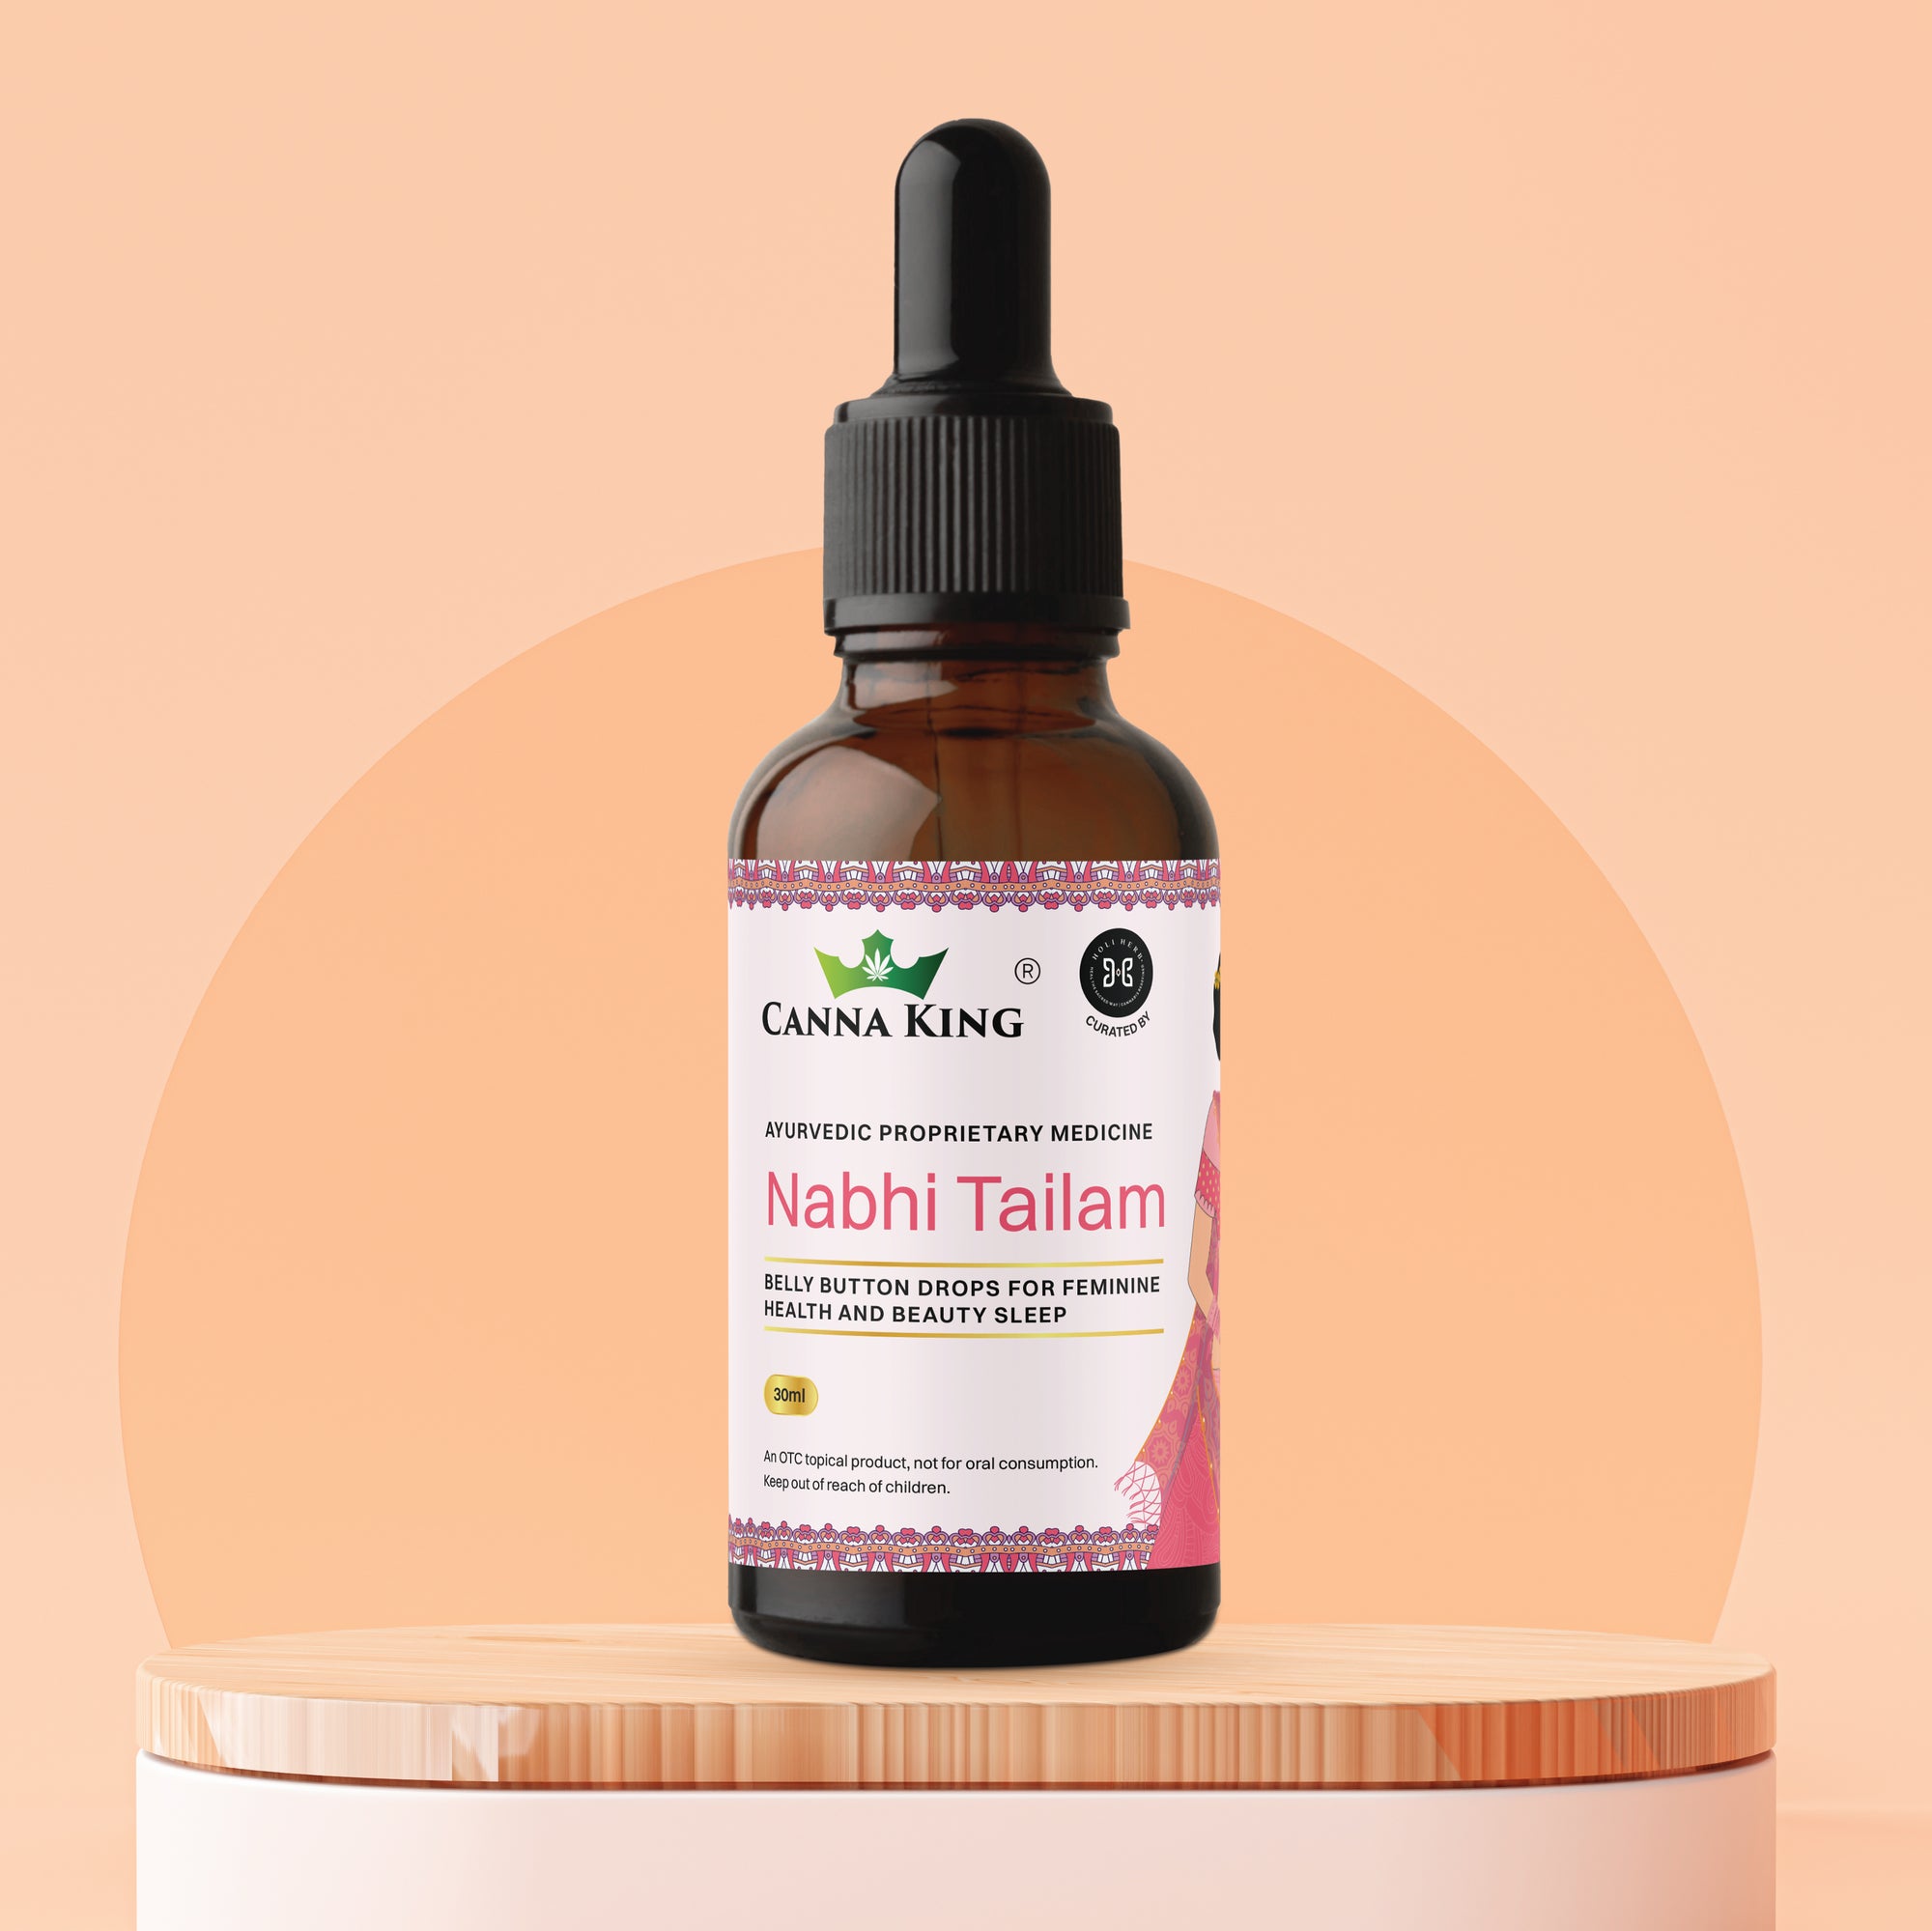 Cannaking Nabhi Tailam - Belly Button Drops - 30ml